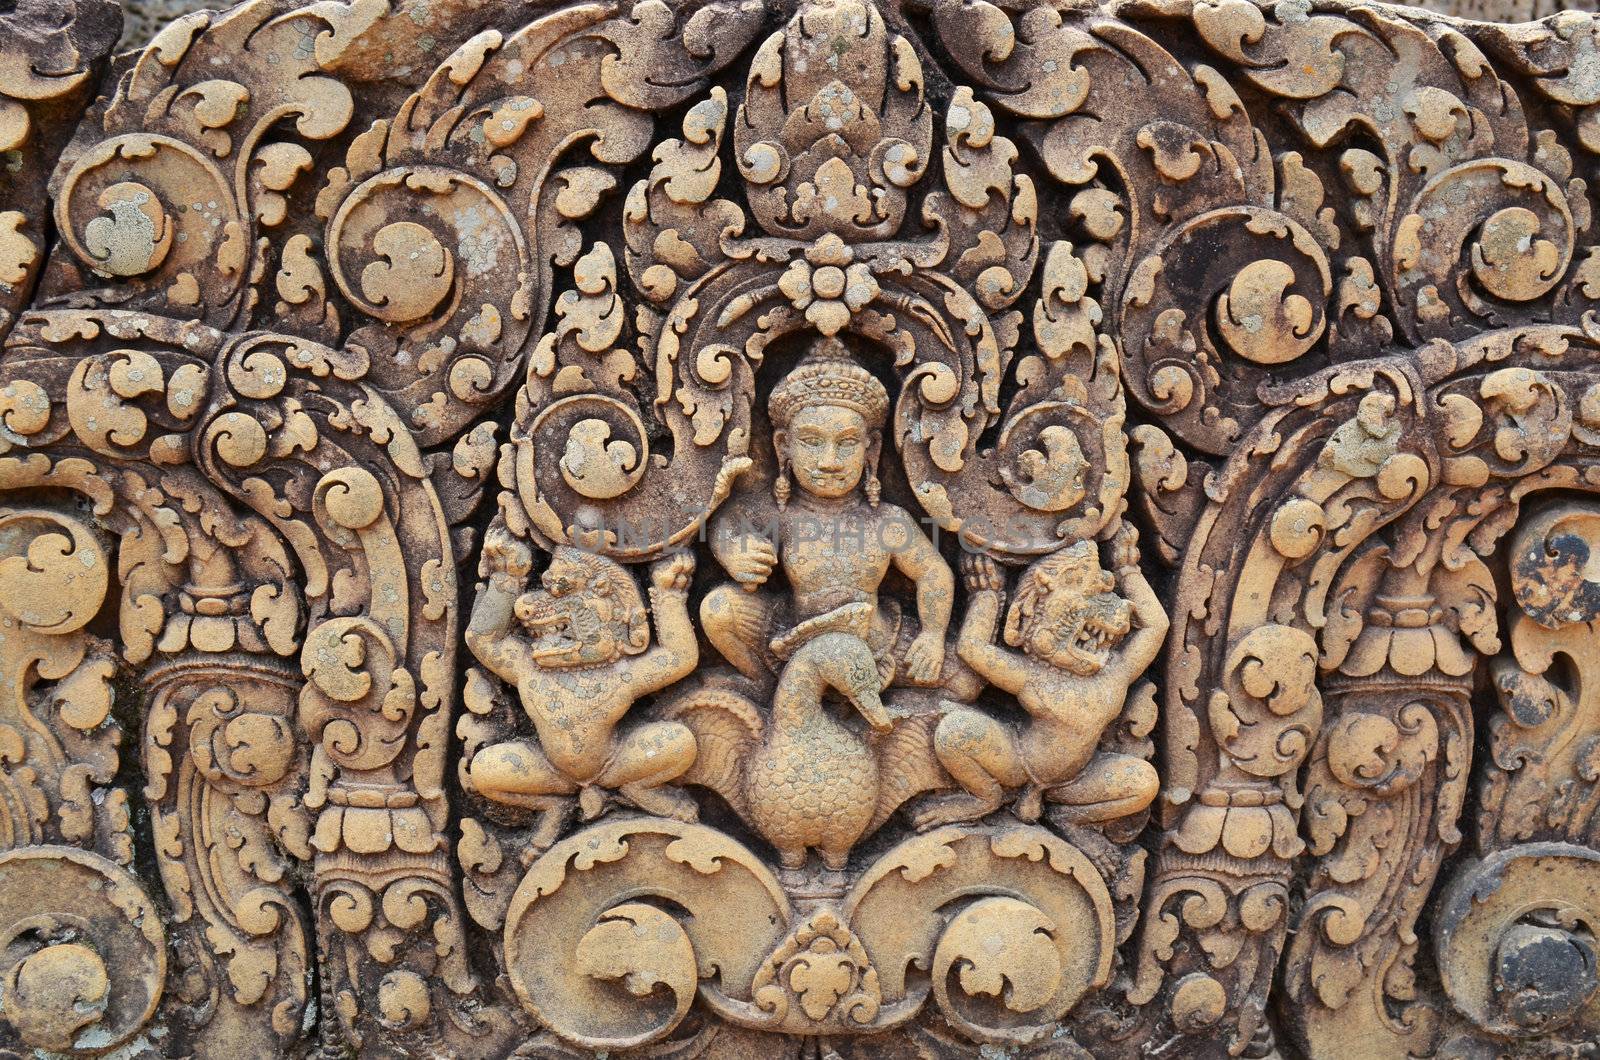 Siem Reap - Cambodia June 2012 - carvings in Angkor Archaeological site 